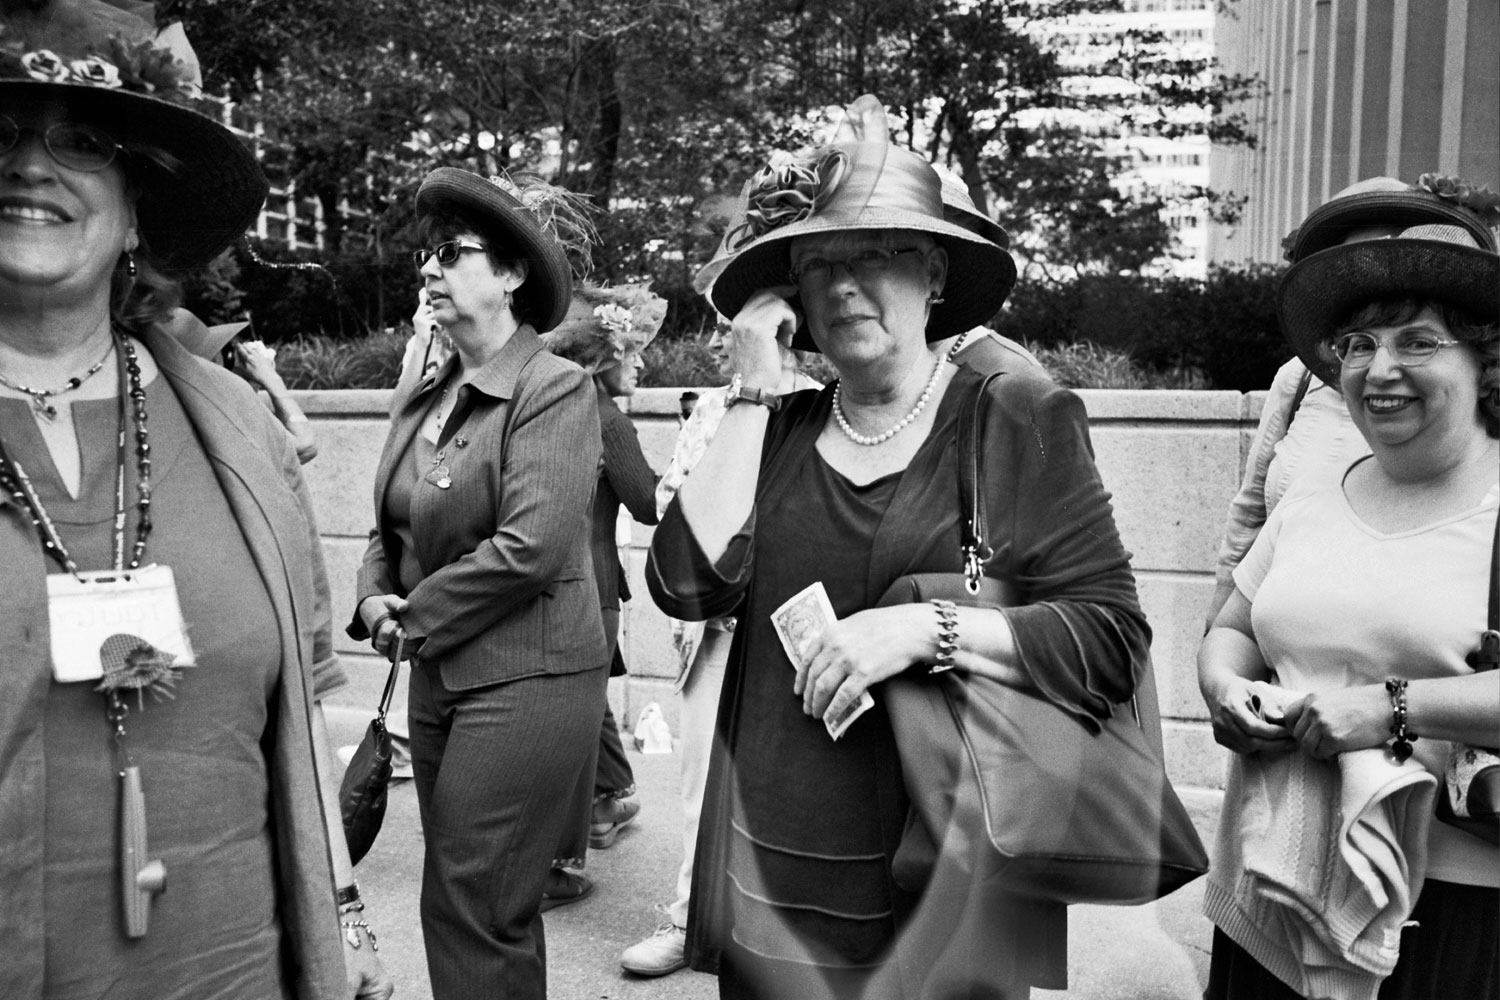 Ladies dressed in their finest on the street in Chicago, Ill.